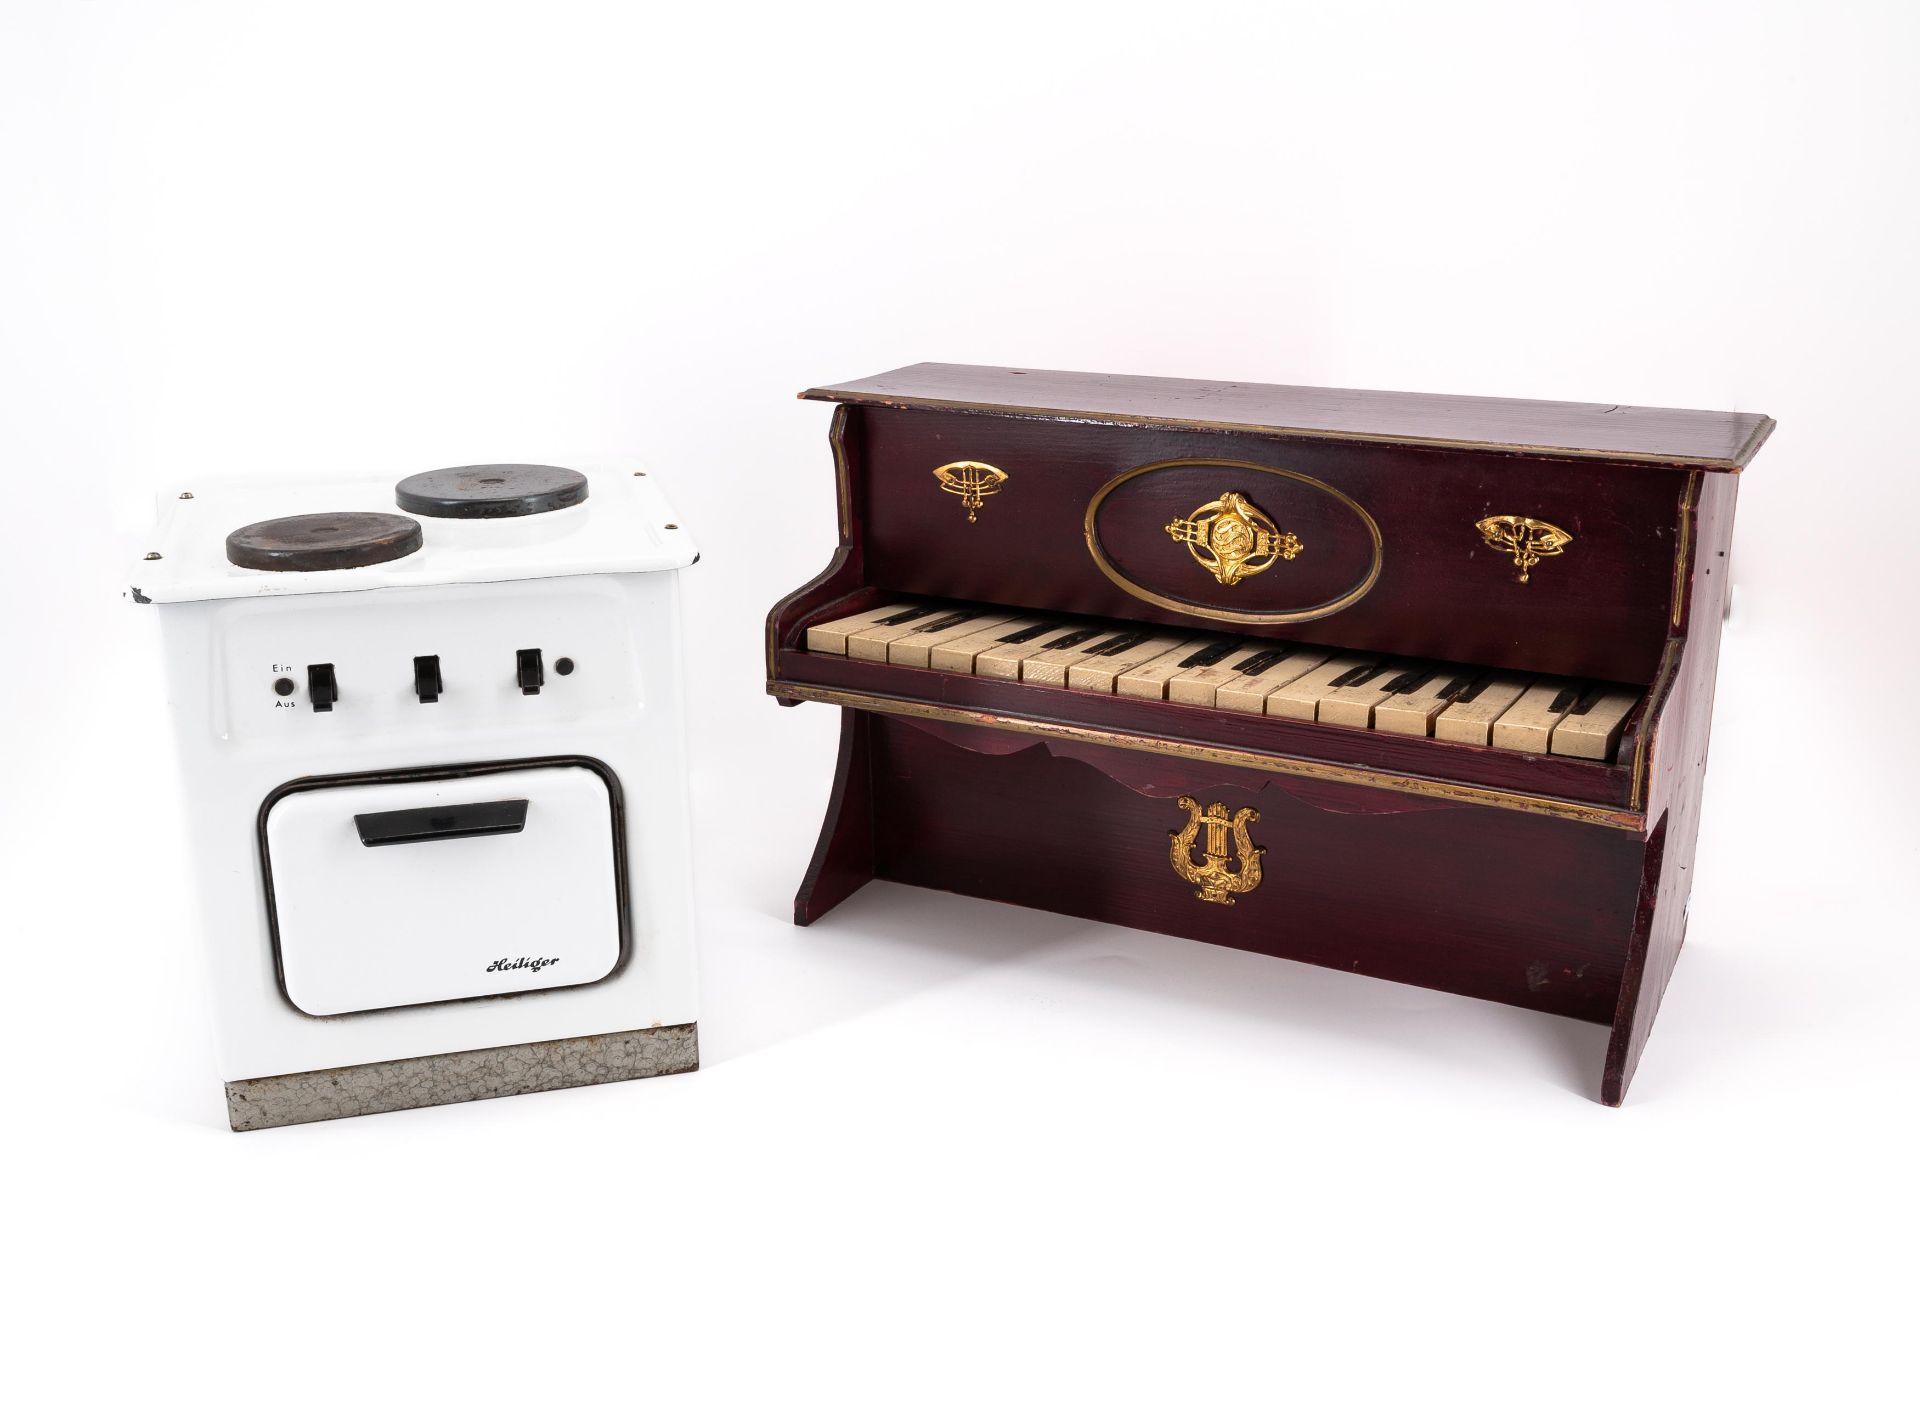 GermanyTOY PIANO MADE OF WOOD, BRASS AND PLASTIC AND A DOLL'S COOKING STOVE MADE OF SHEET METAL WITH